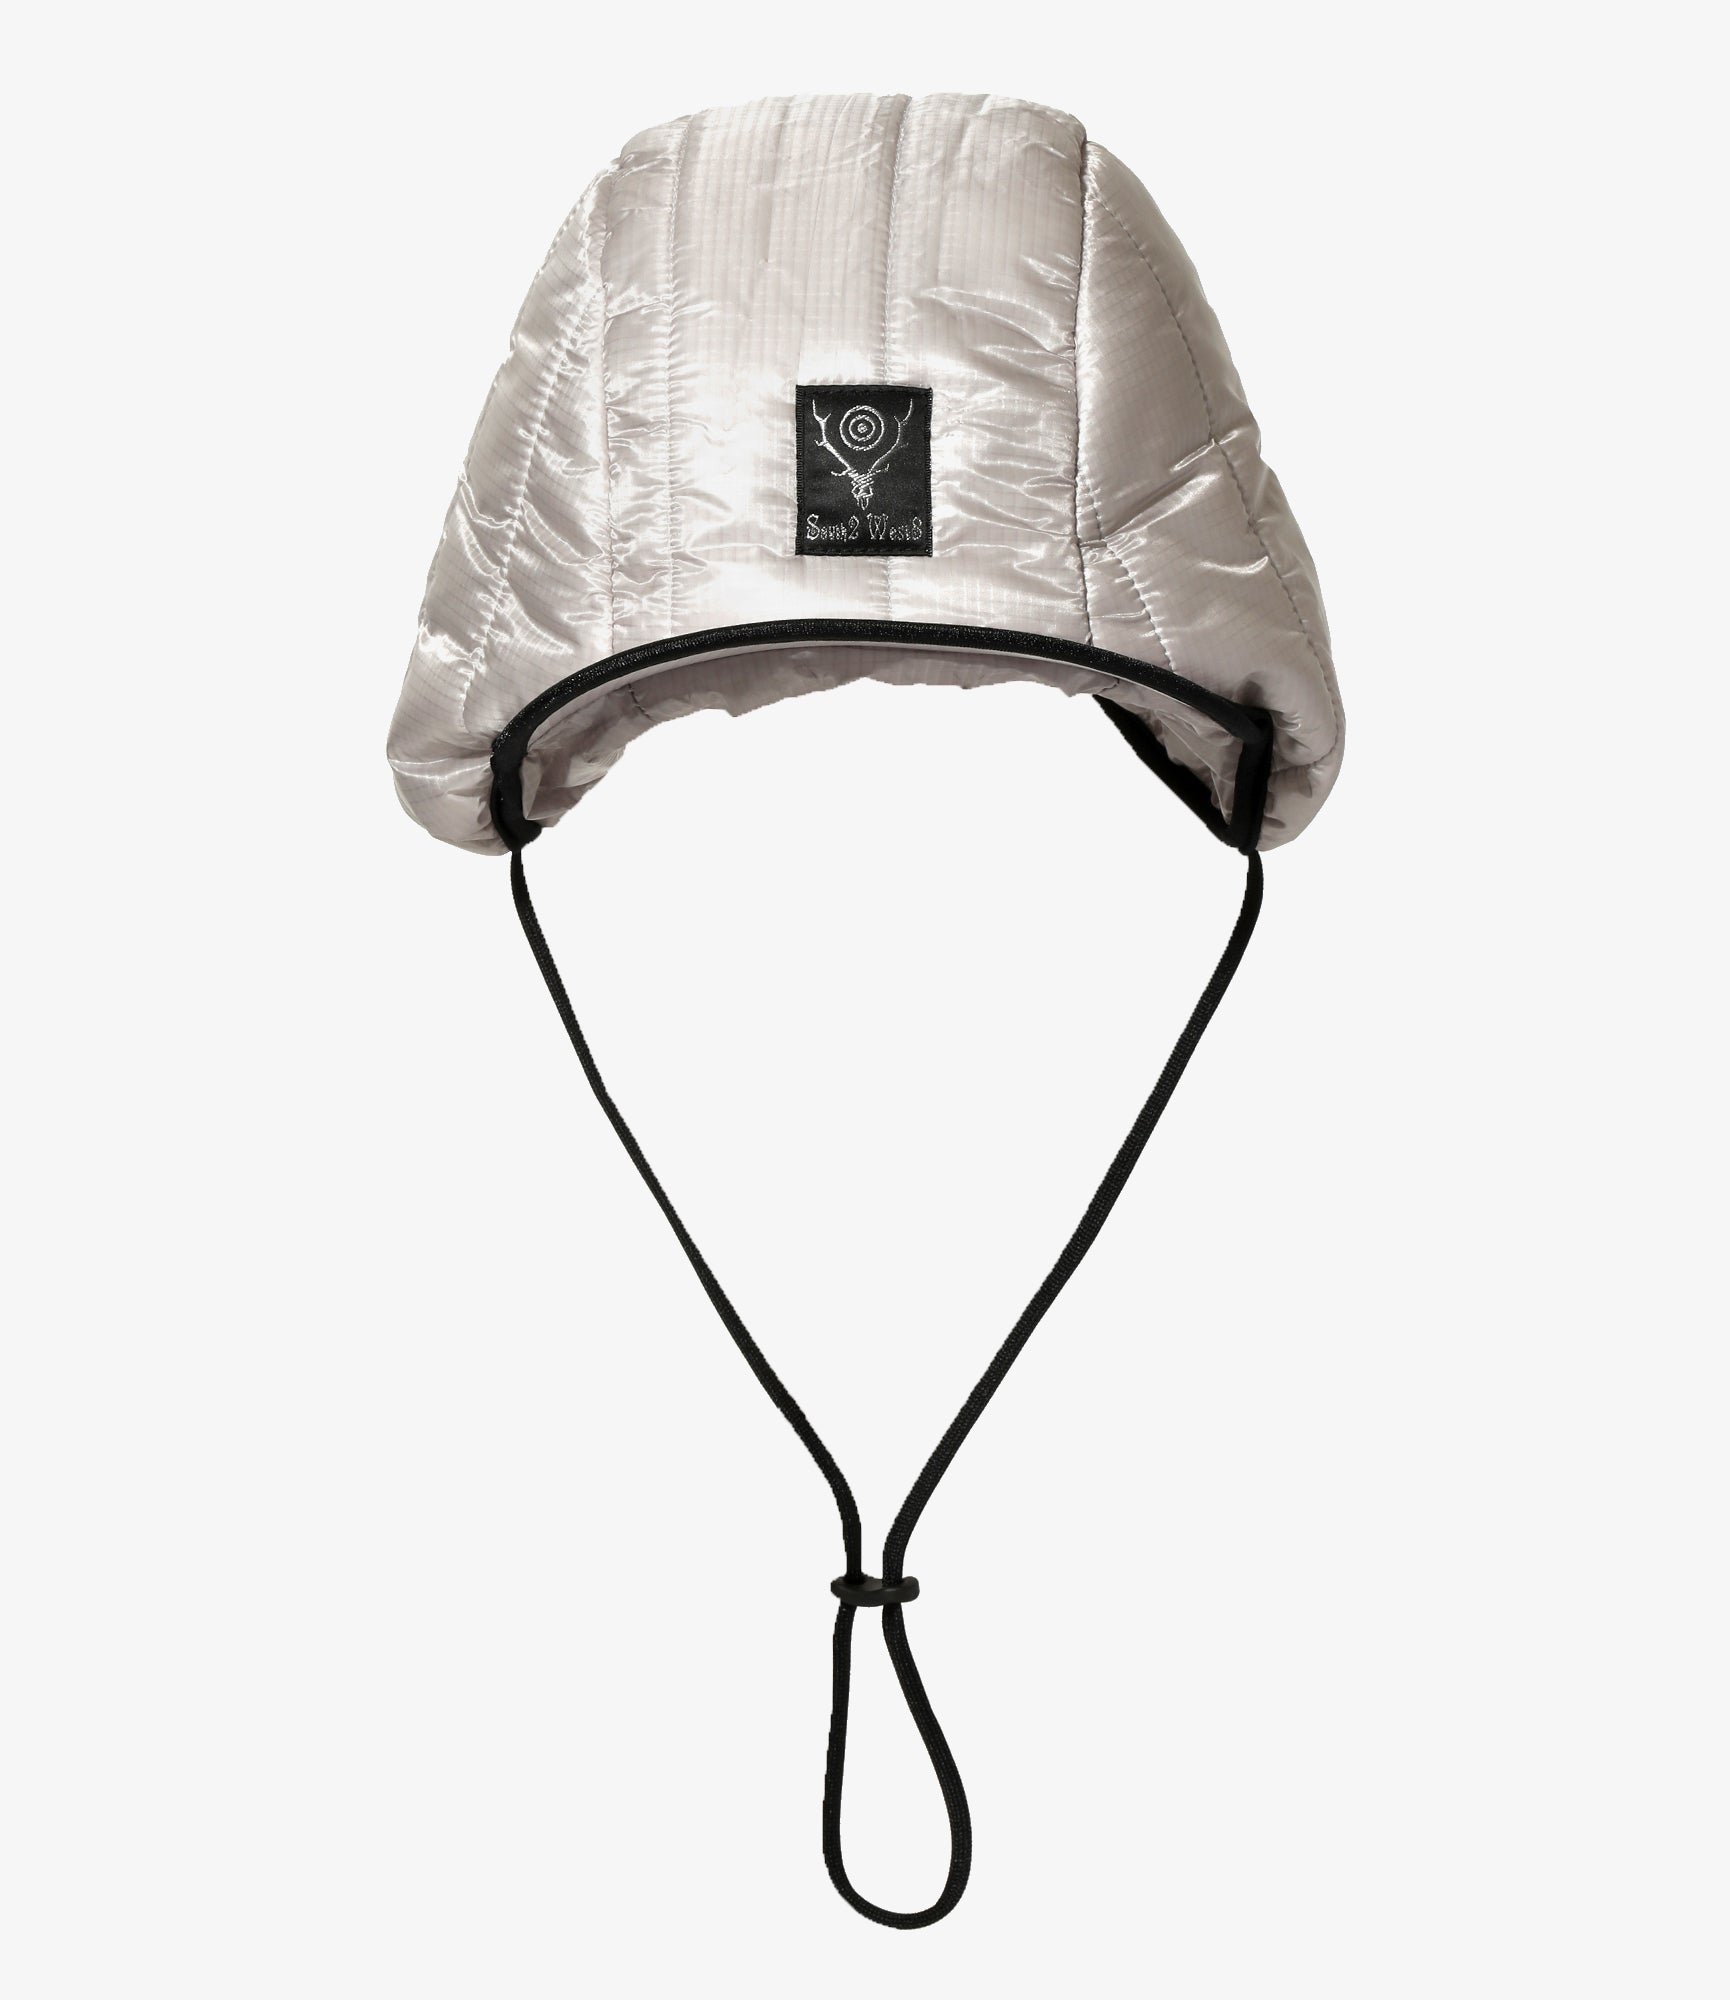 South2 West8 Quilted Cap - Nylon Ripstop - Grey